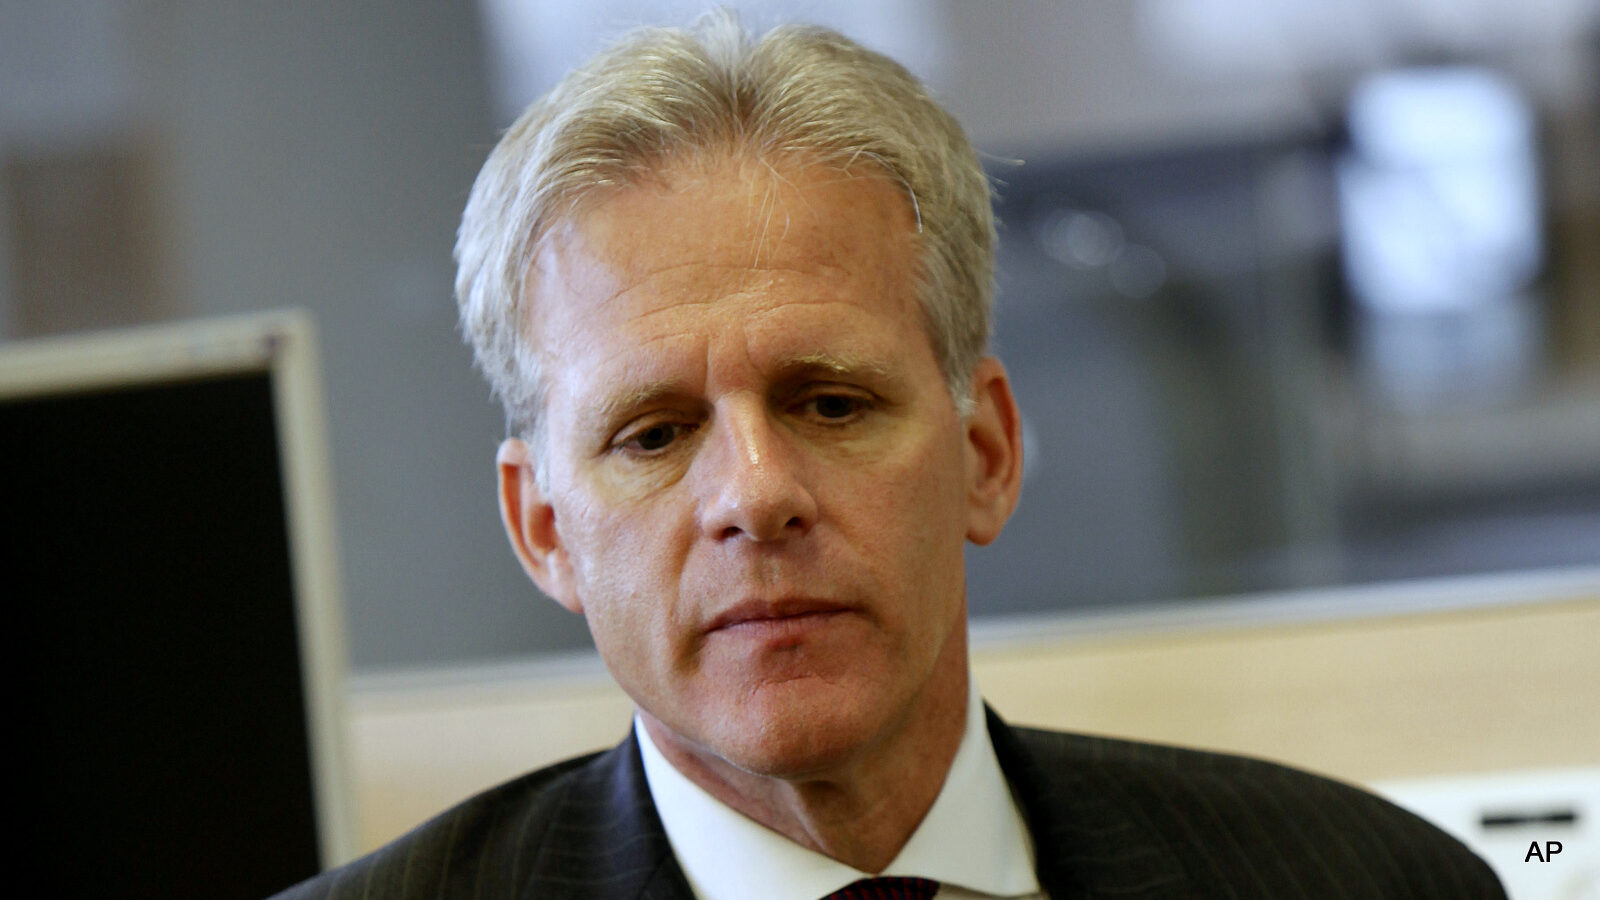 Michael Oren pauses during an exclusive interview